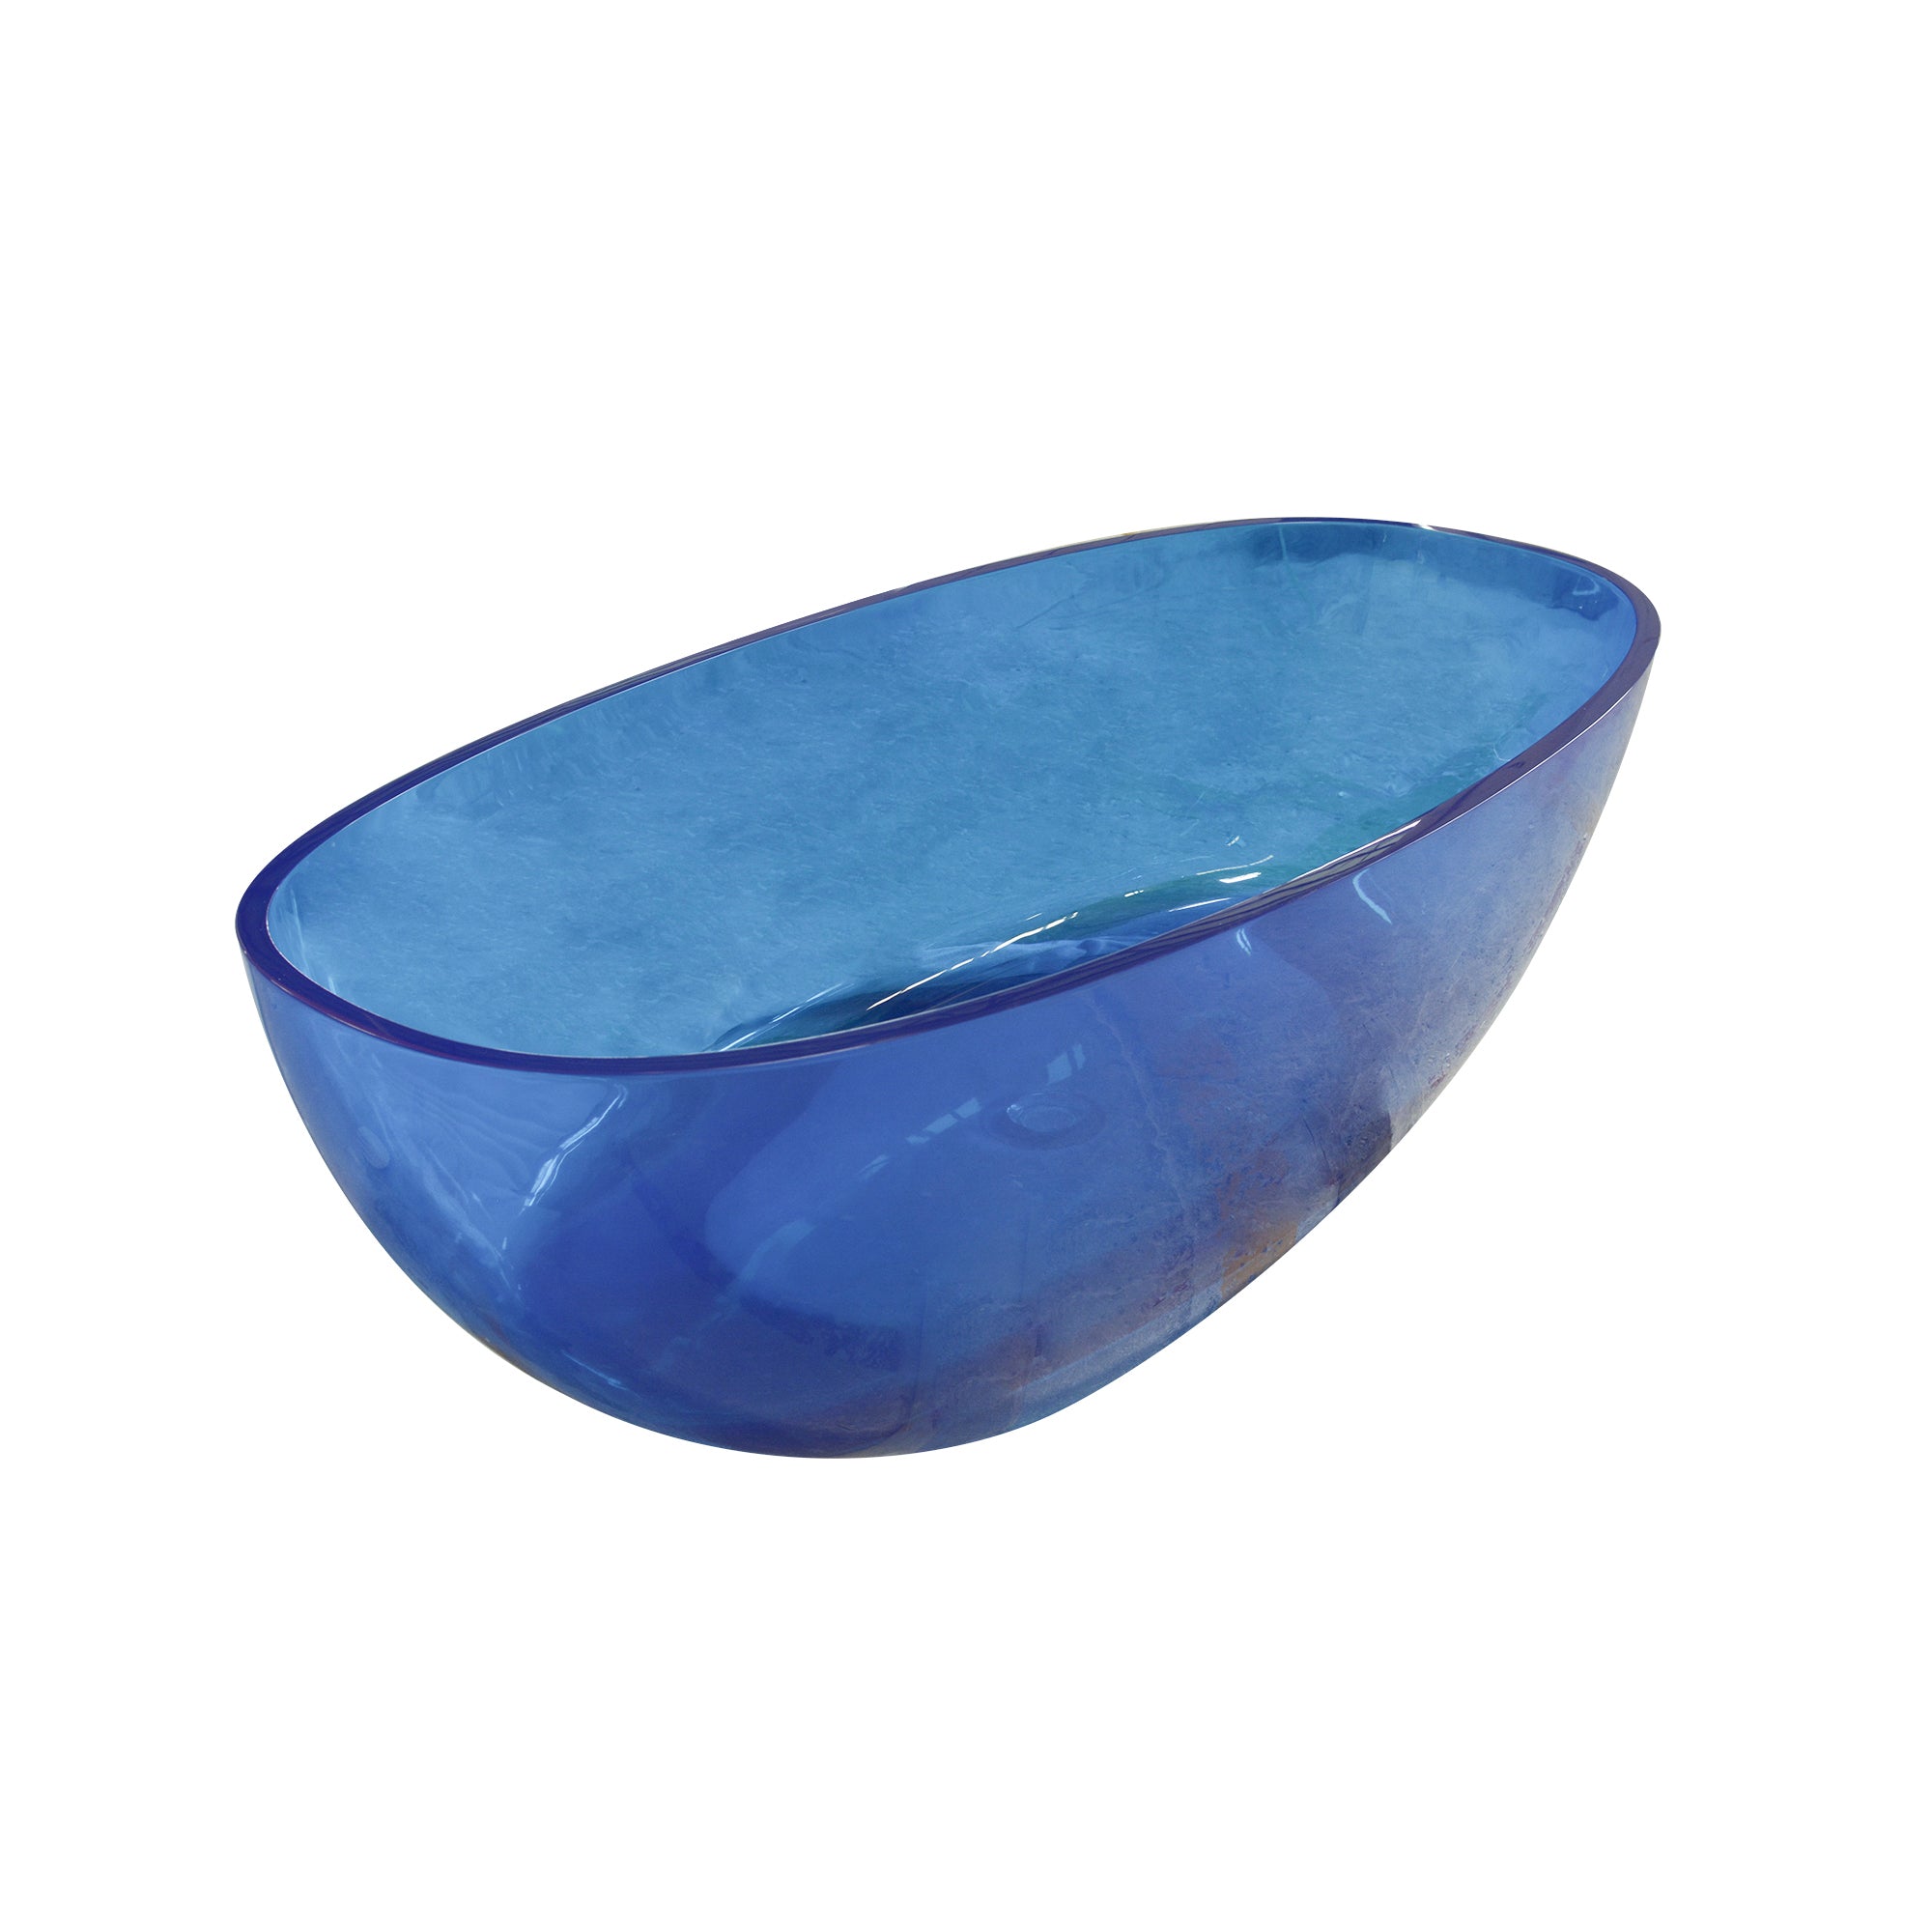 64" Oval Shaped Freestanding Solid Surface Soaking Bathtub in Transparent Blue RX-S02-64TBU